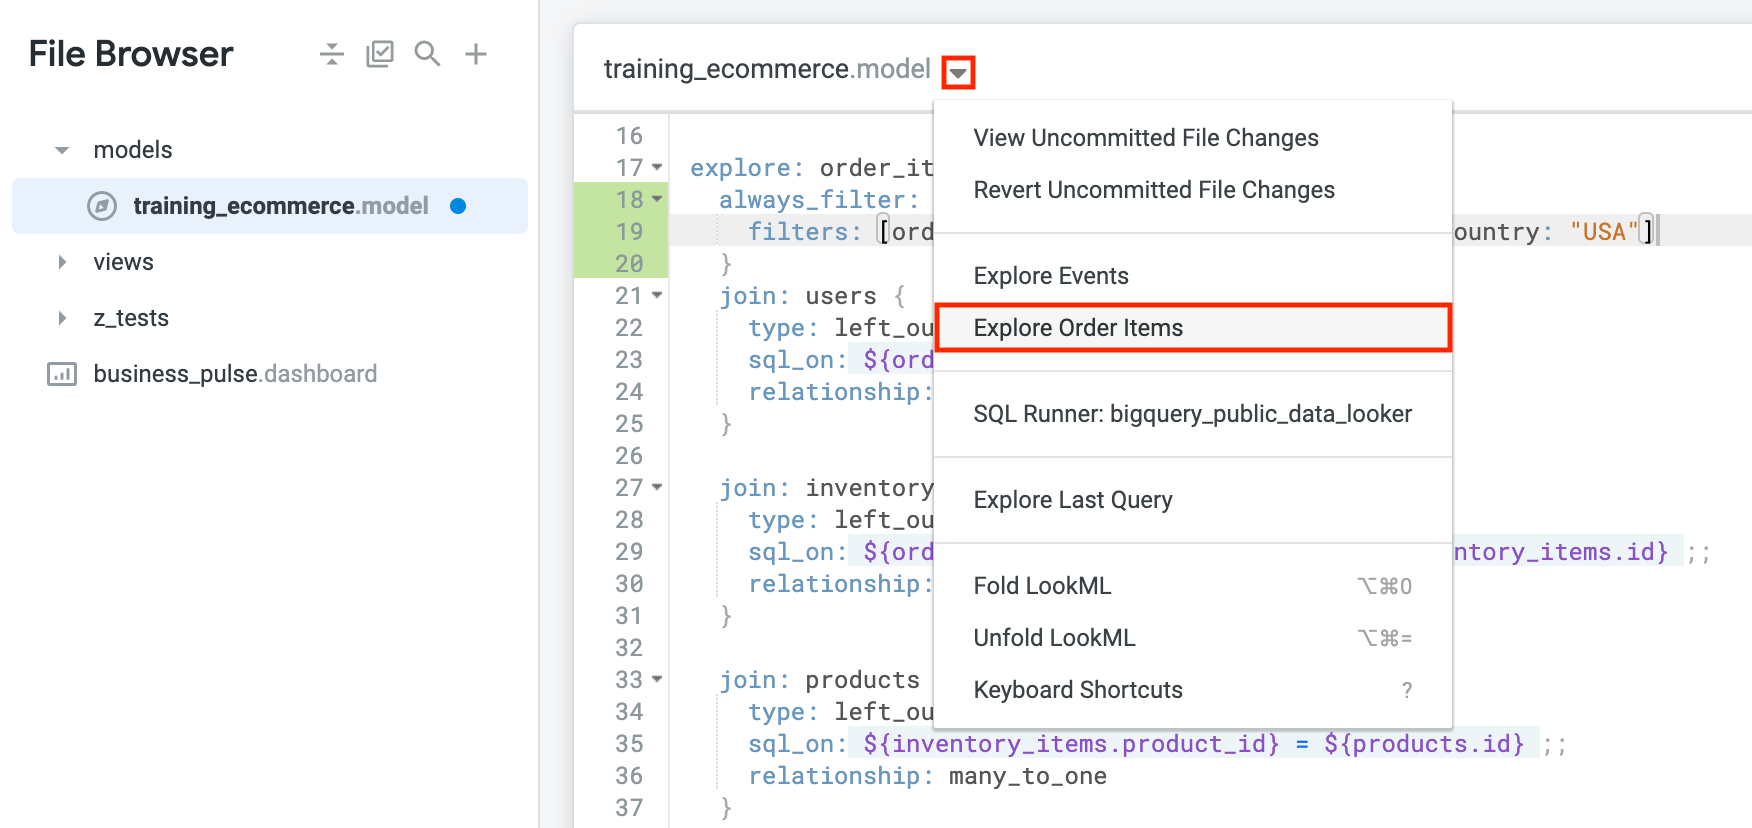 The option 'Explore Order Items' highlighted within the training_ecommerce.model file's drop-down menu.